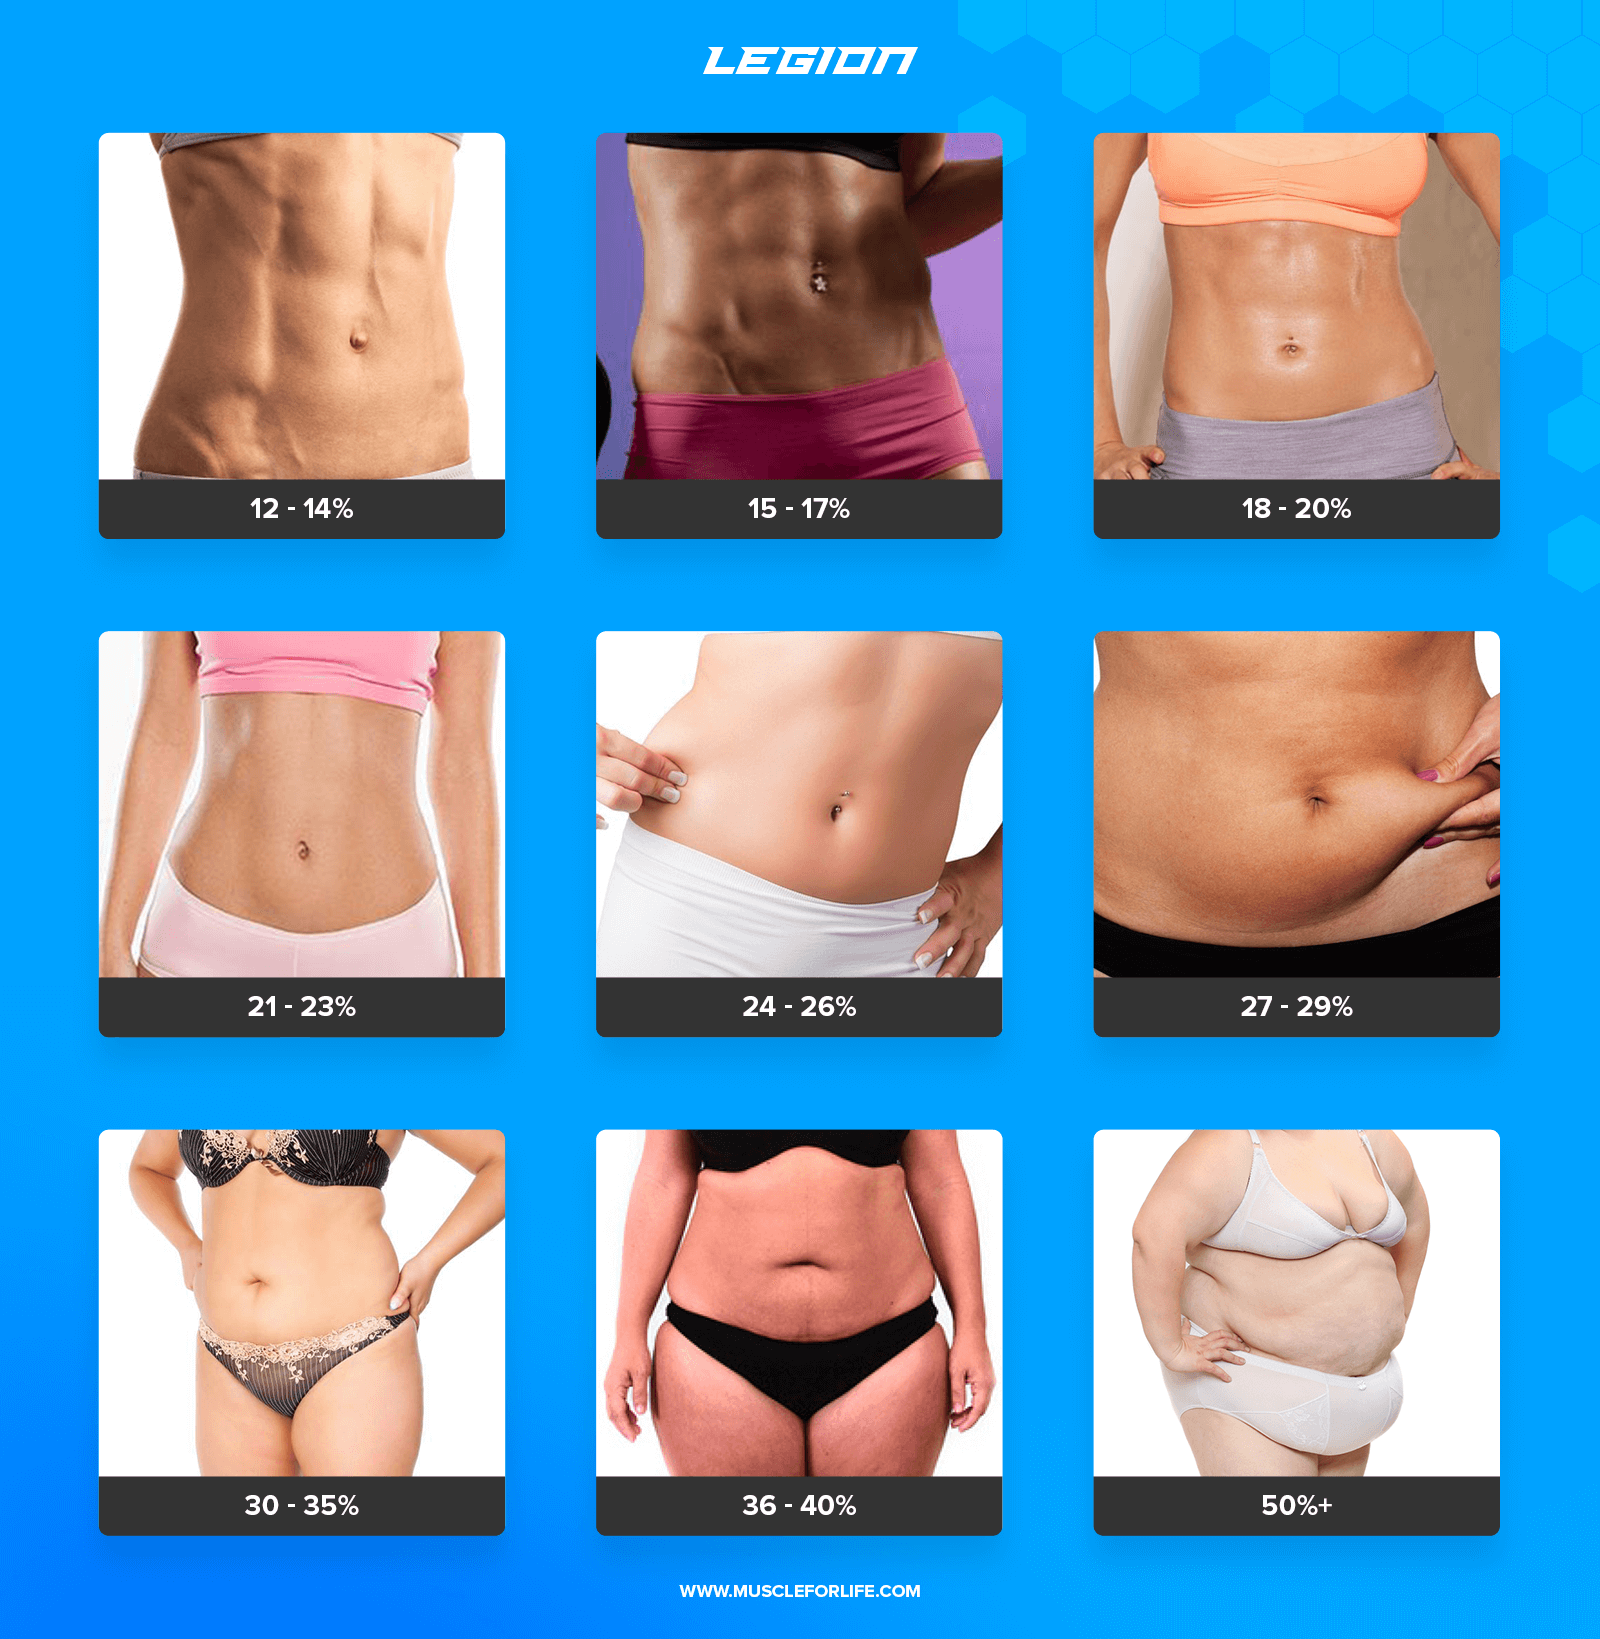 Body Fat Percentage Chart Pictures